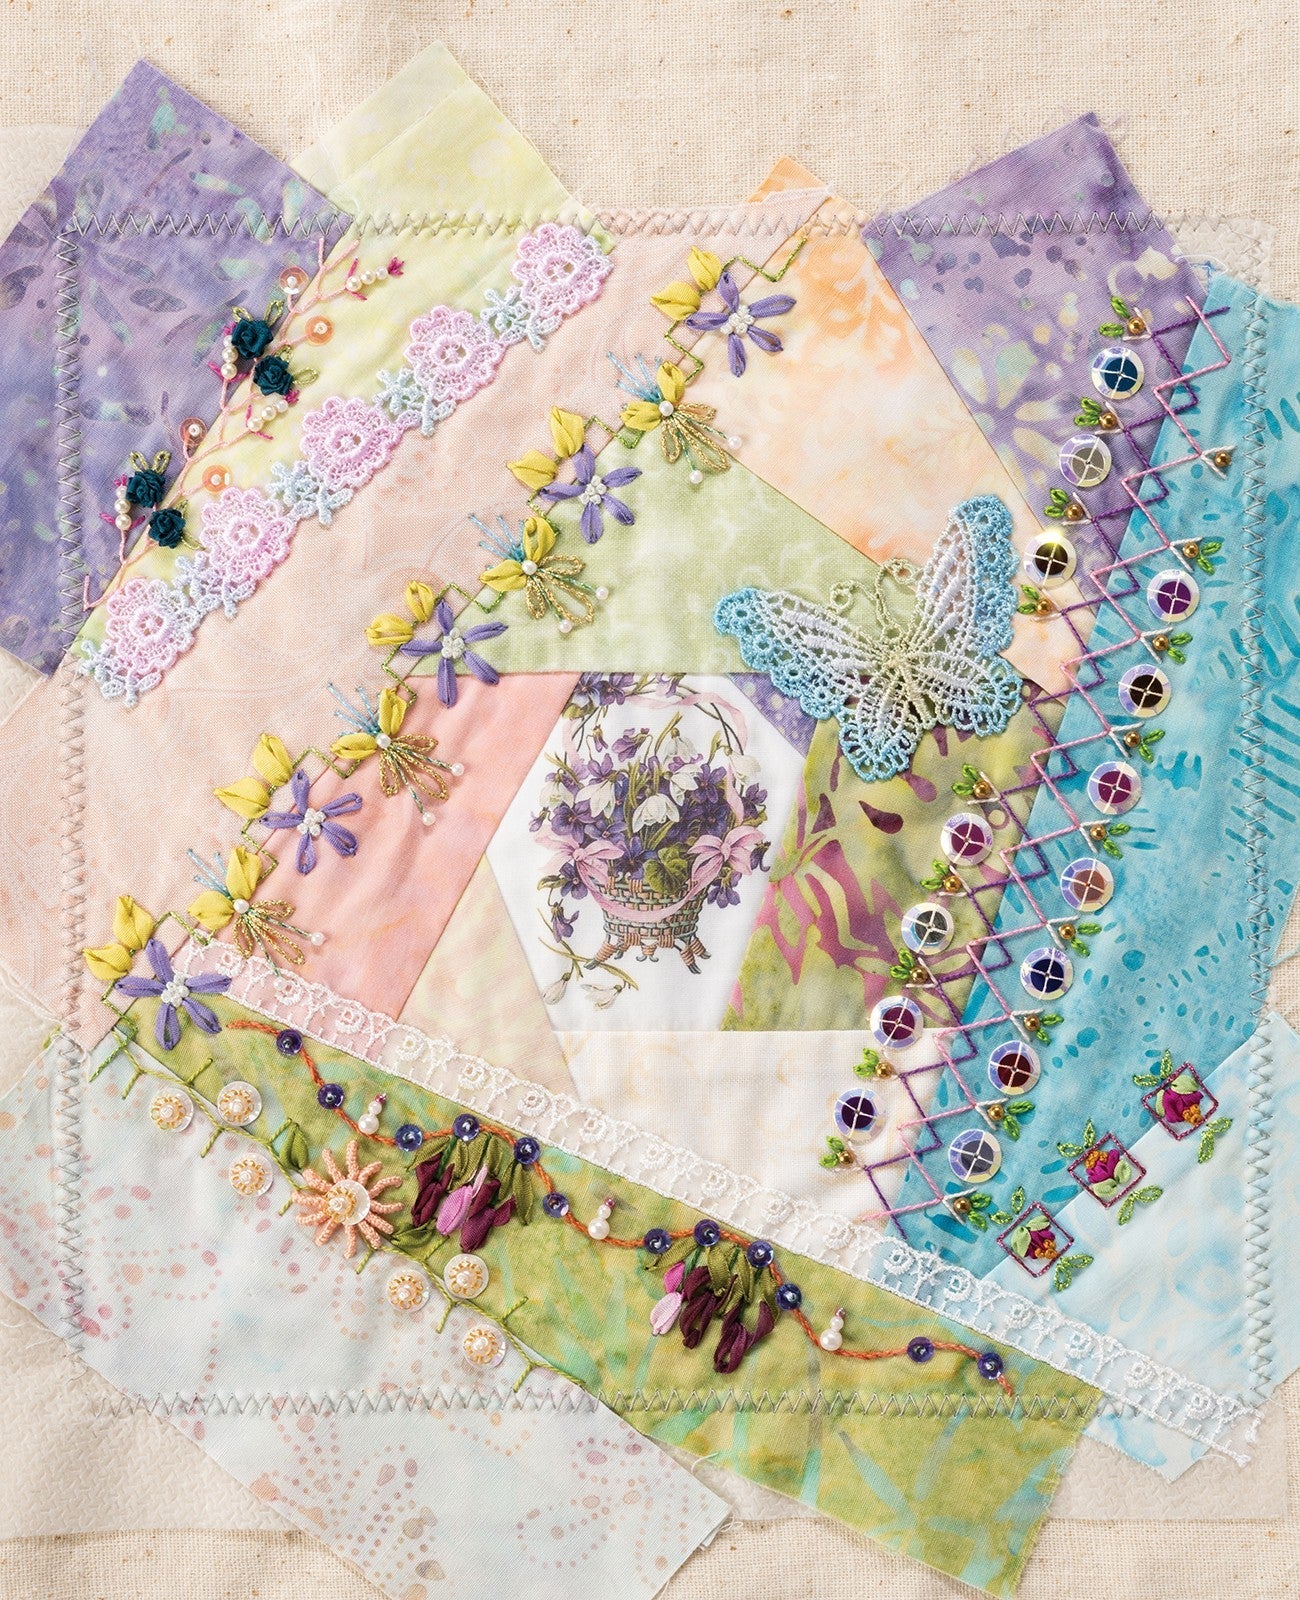 More Stunning Stitches for Crazy Quilts